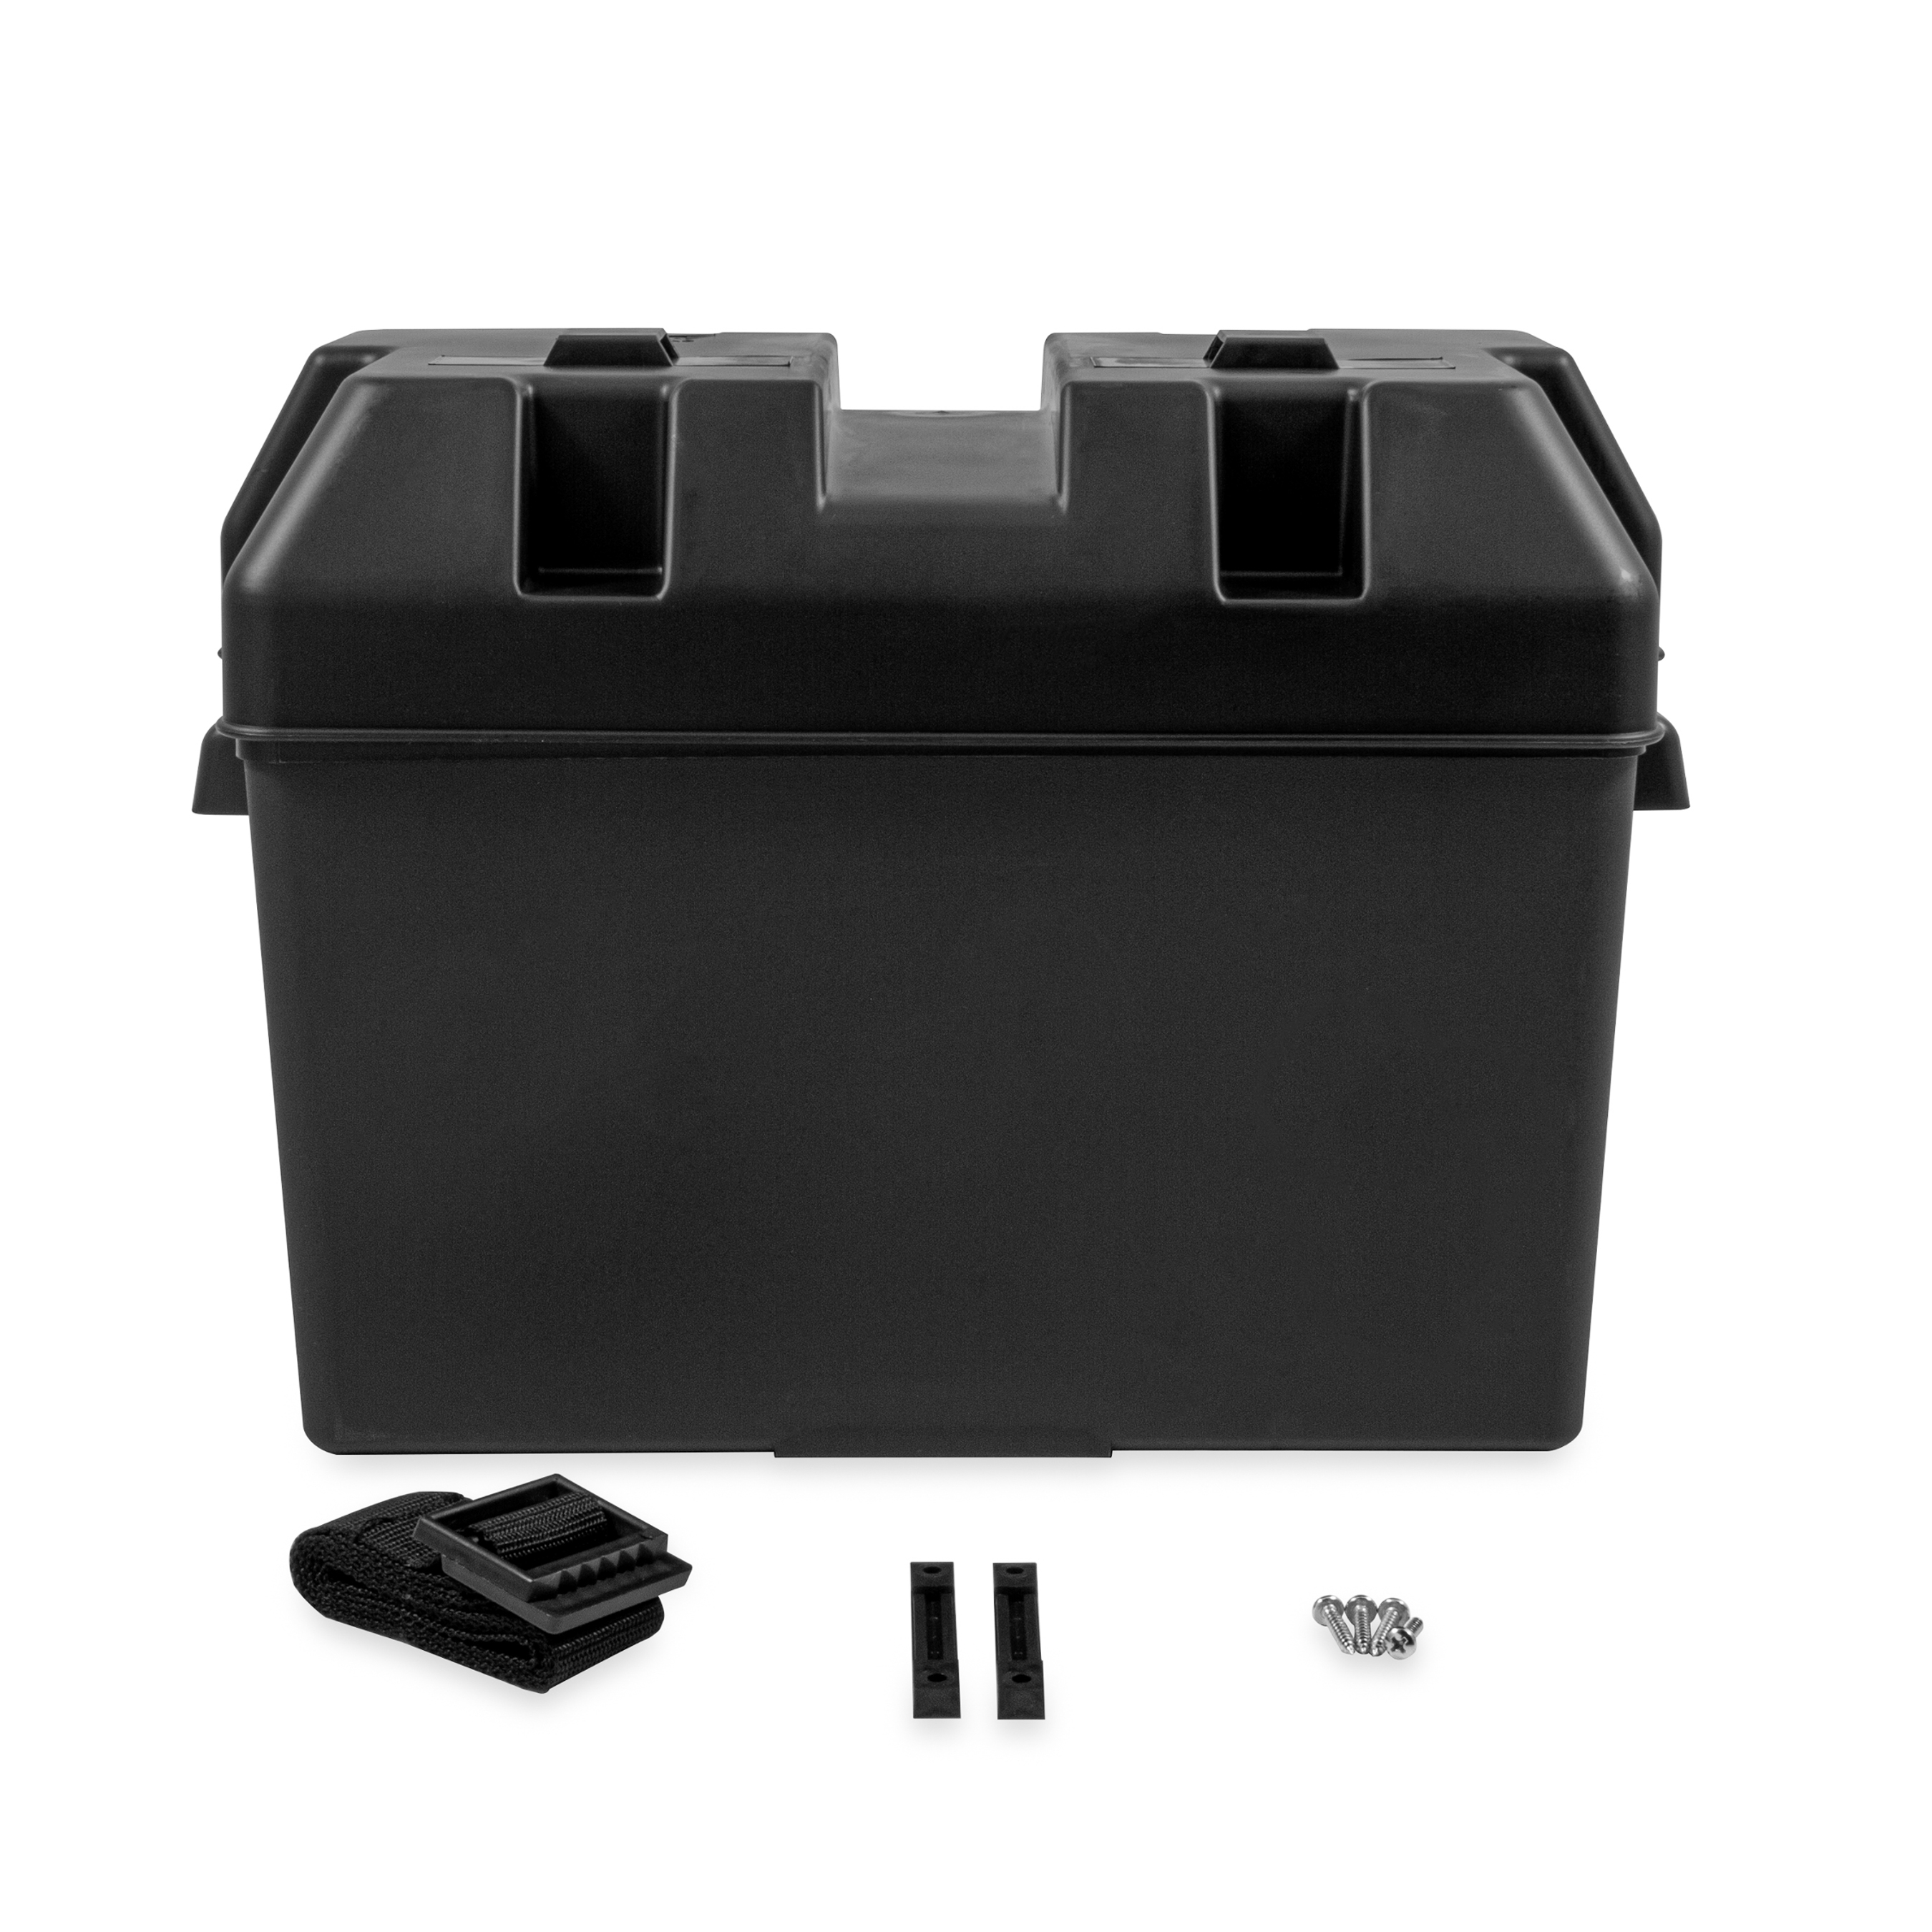 Camco RV Large Battery Box - Inside Dimensions 7.25-inches x 13.25-inches x 8.63-inches (55372) - image 1 of 8